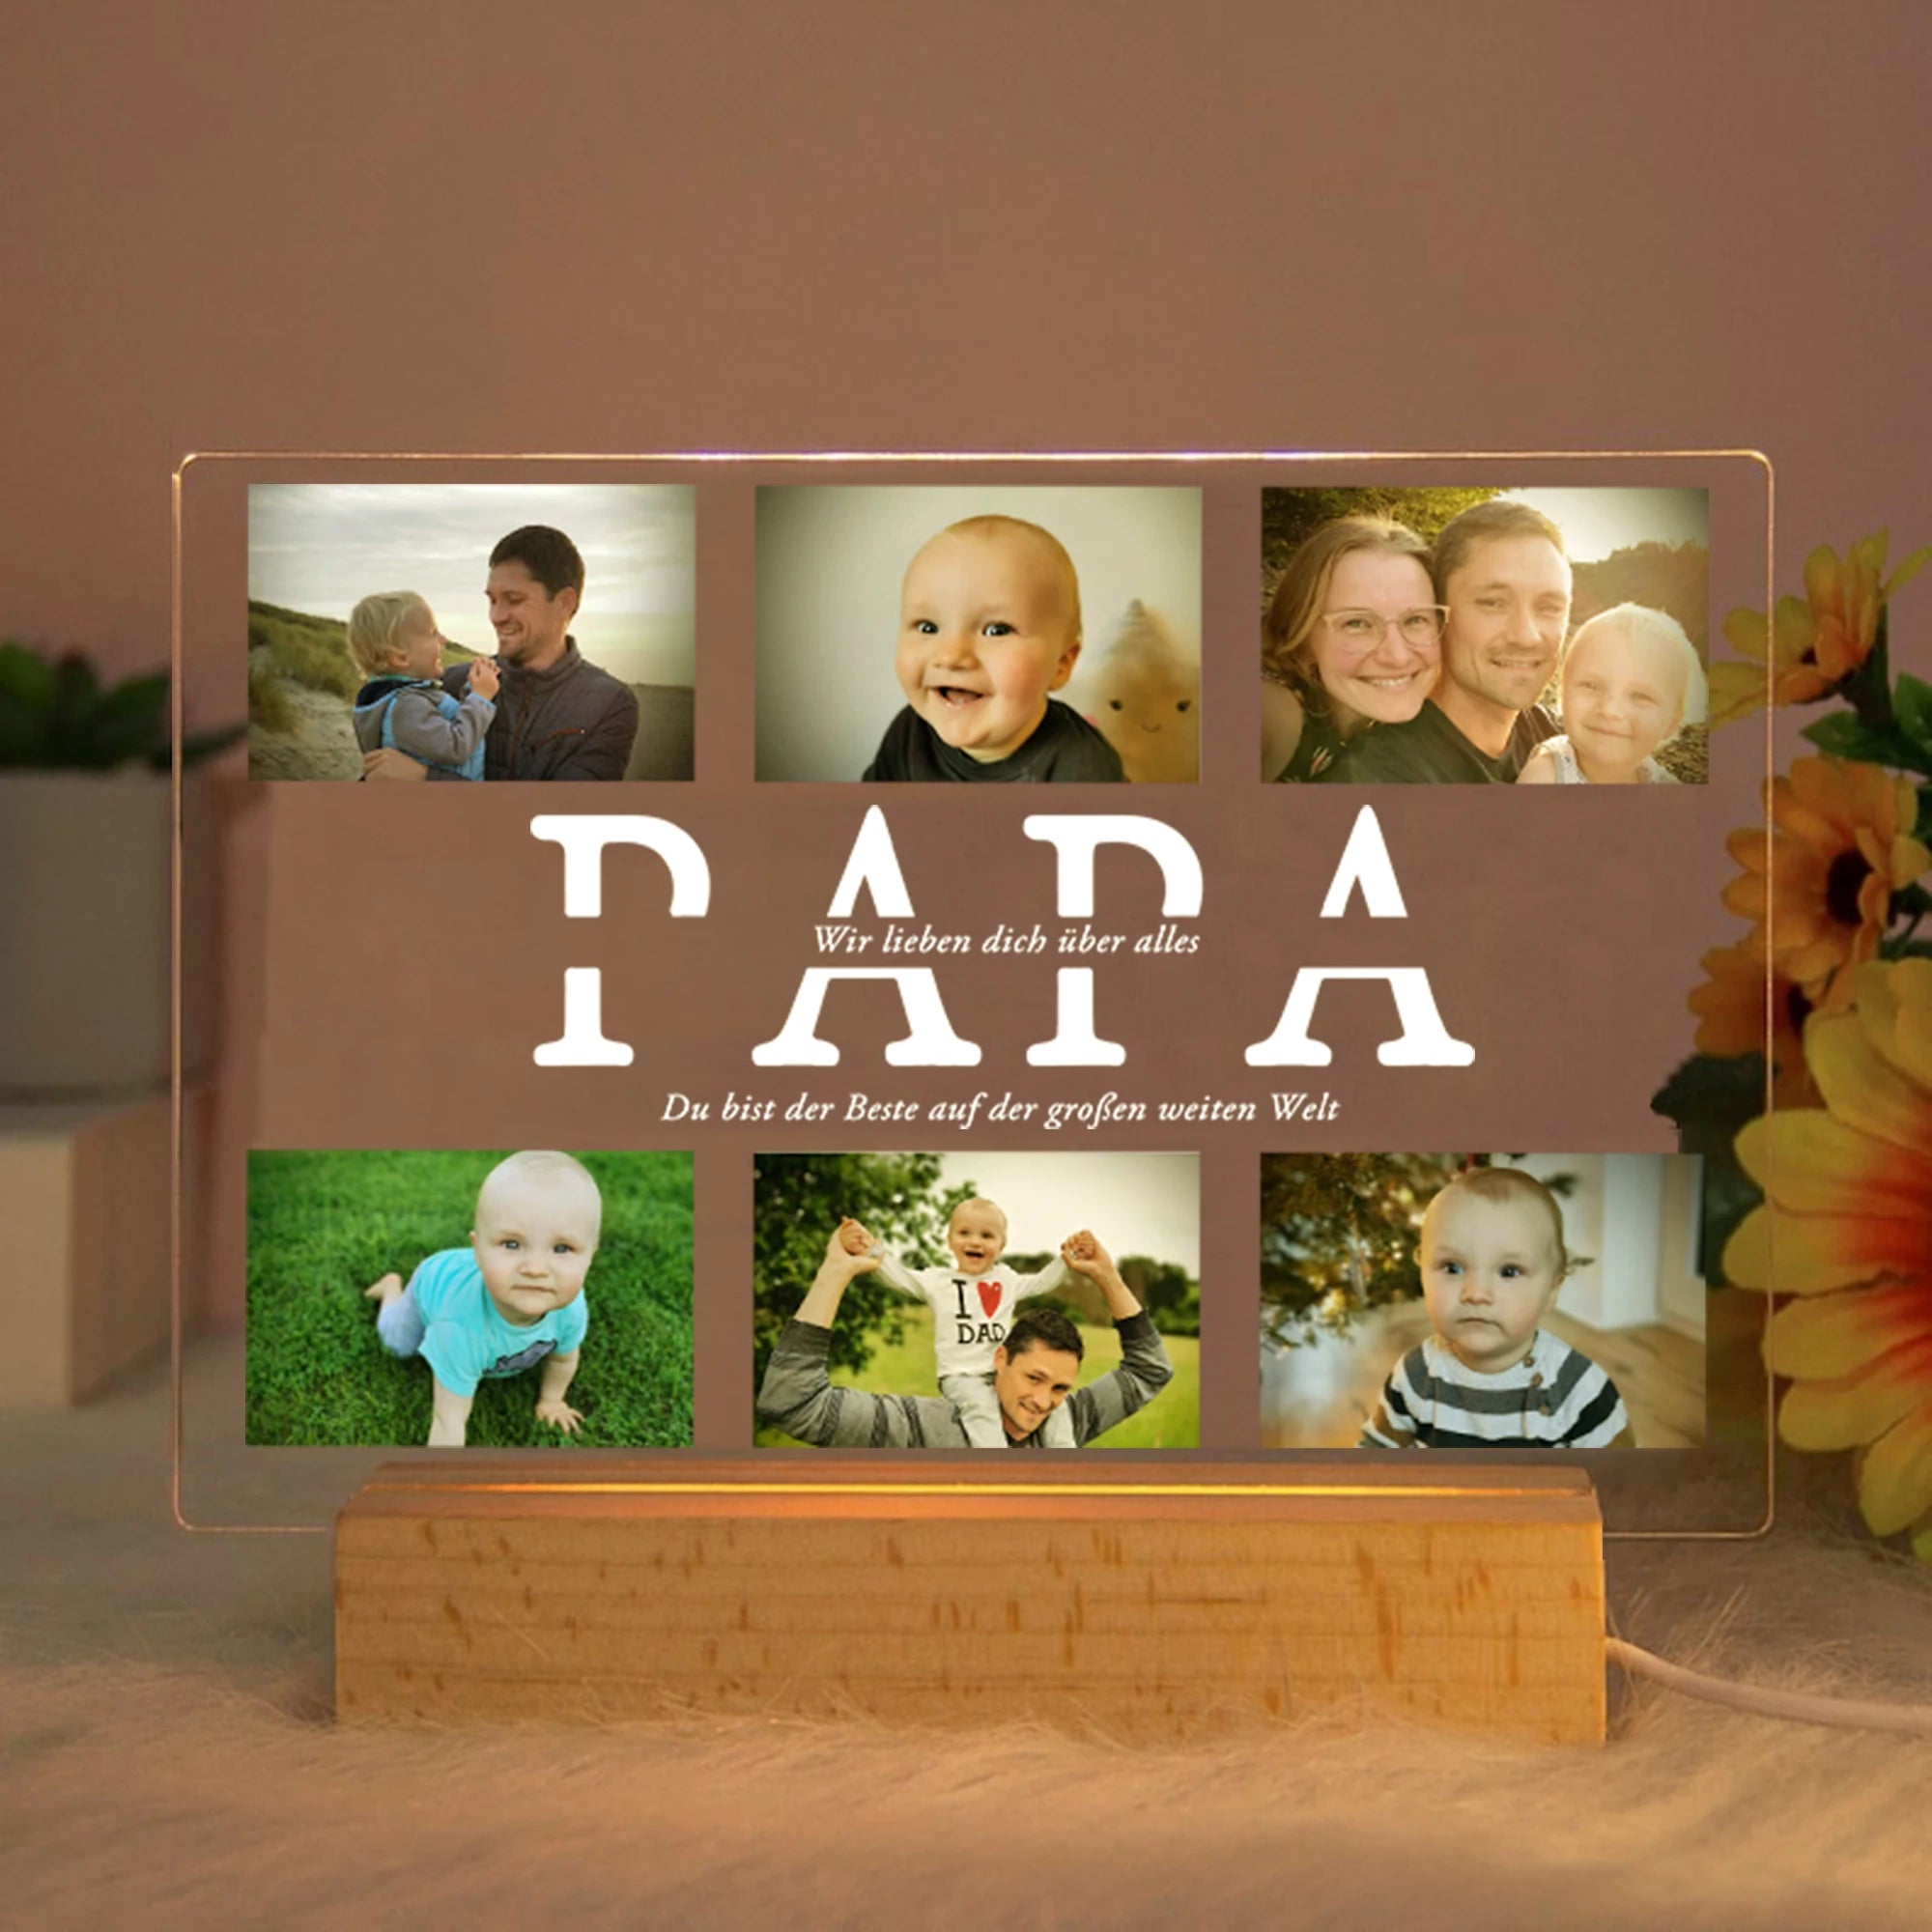 Personalized Custom Photo Text 3D Acrylic Lamp - Customized Bedroom Night Light for MOM DAD LOVE Family Day Christmas Birthday Gift Warm Light / PAPA